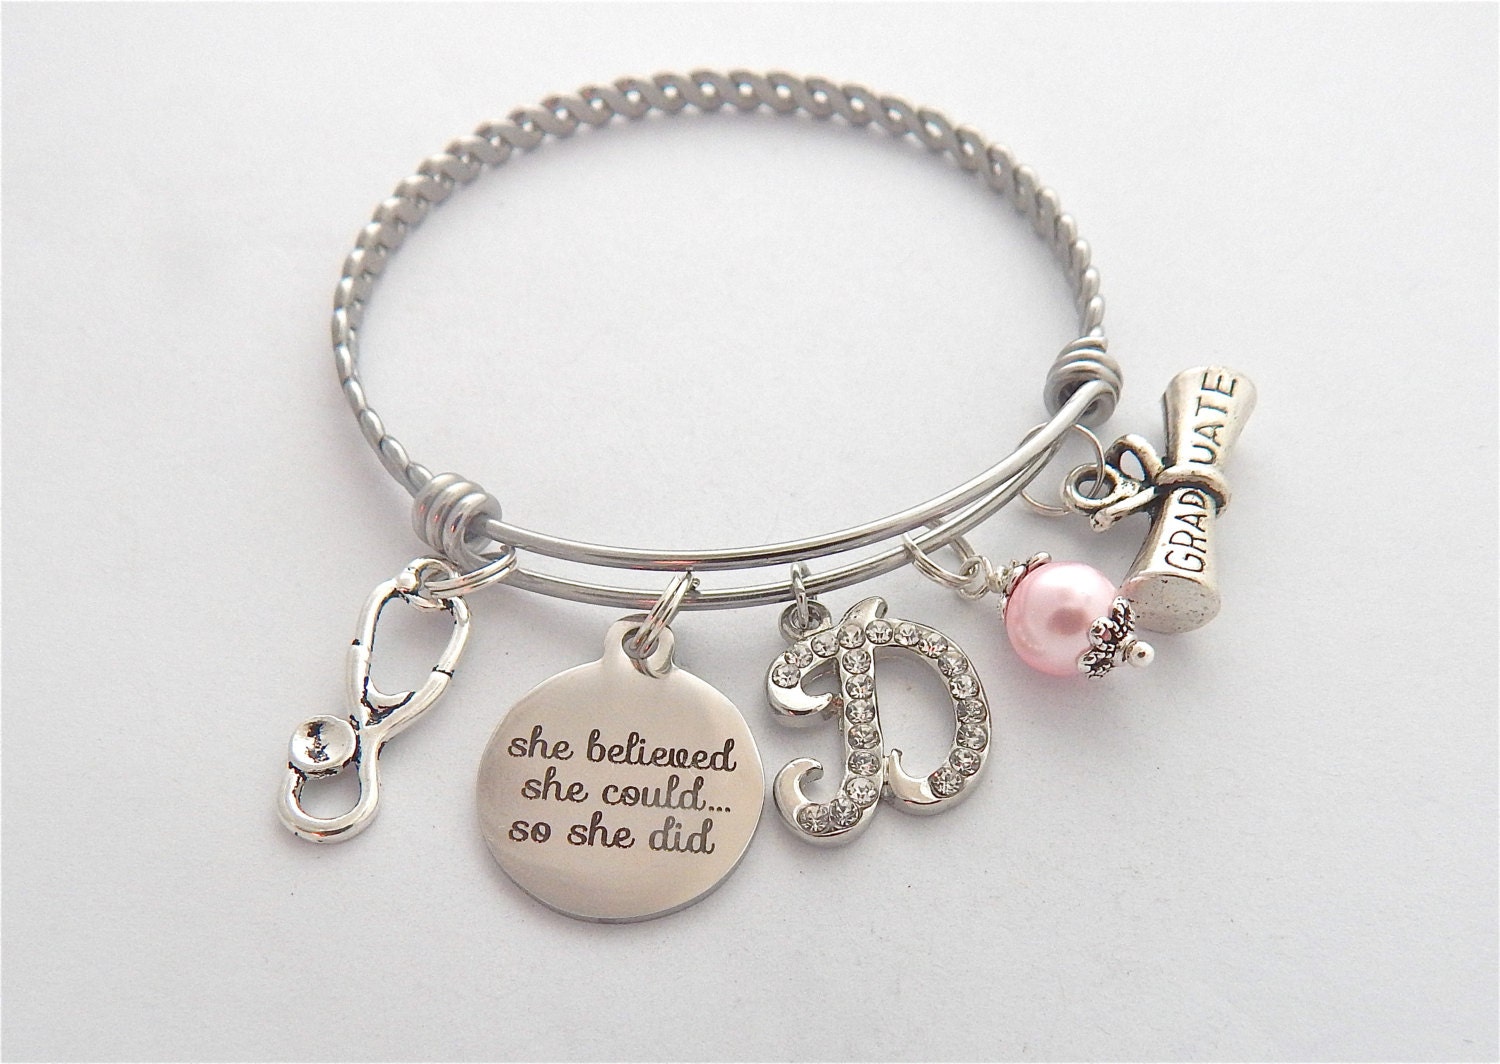 She Believed she could so she did Nurse Graduation Gift, Physician Assistant Jewelry, Gifts for Medical Students, Nurse Graduate Bracelet